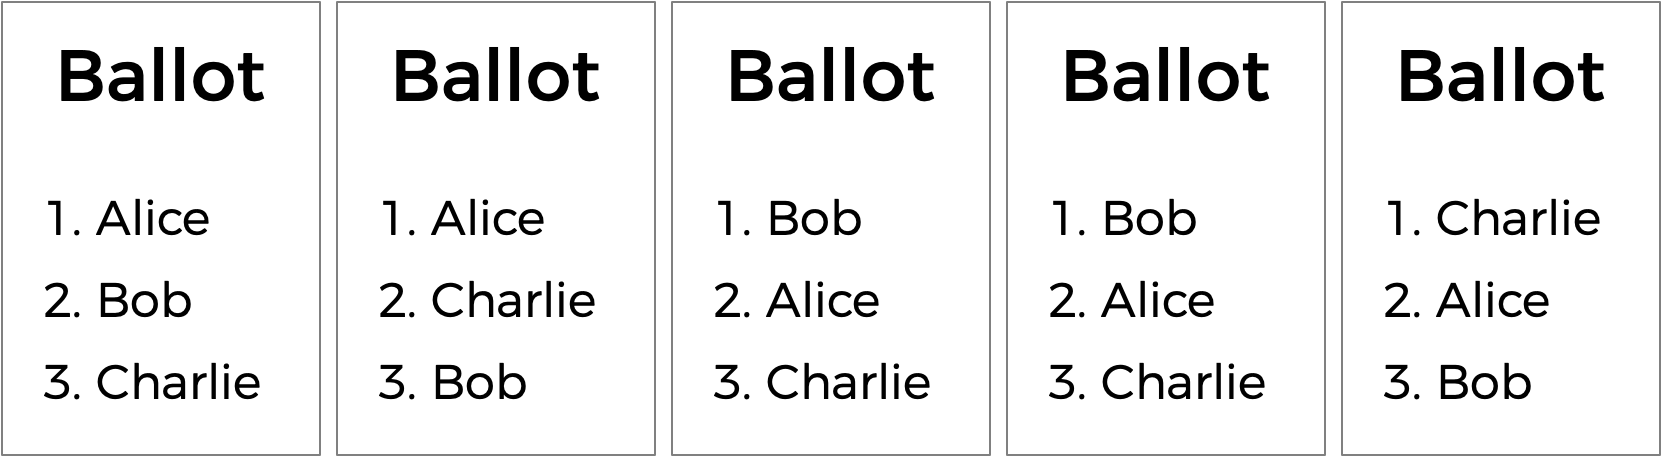 Three ballots, with ranked preferences